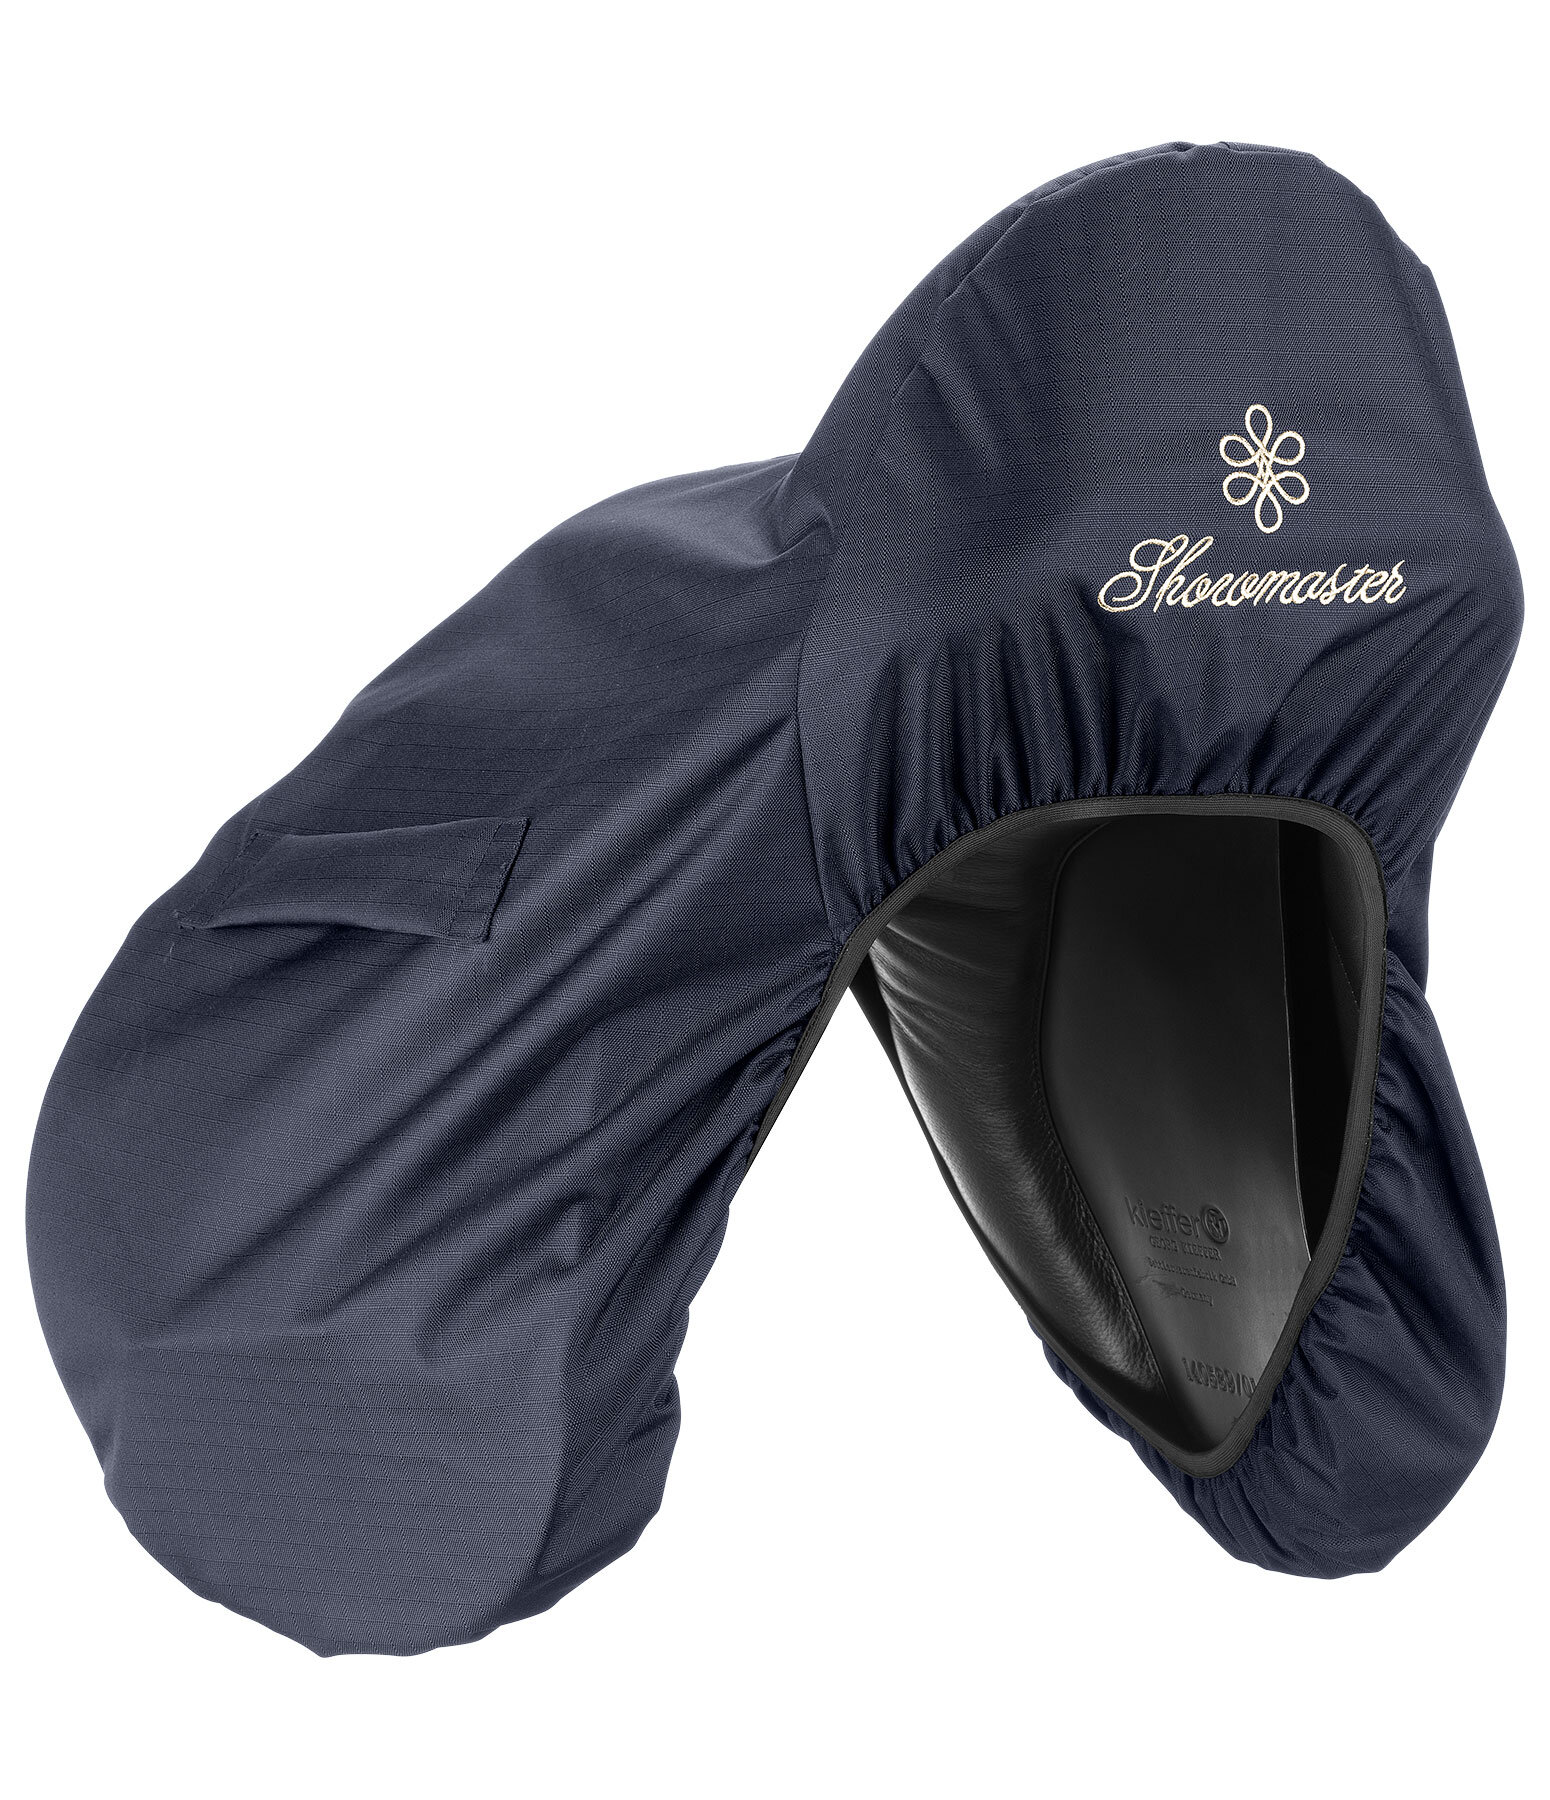 Water-repellent Saddle Cover